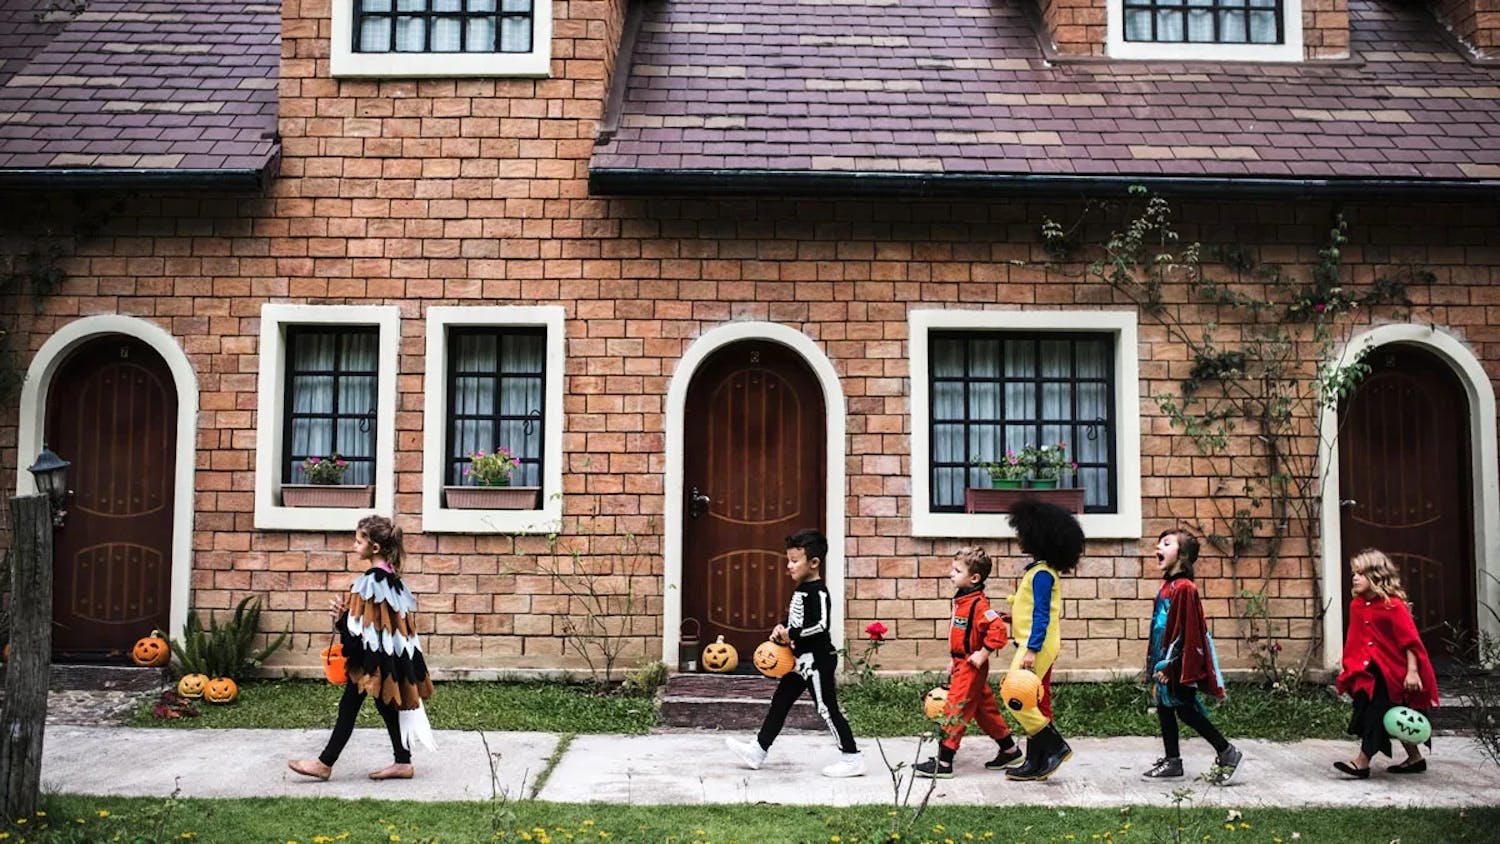 Kids trick or treating | Source: TinyBeans